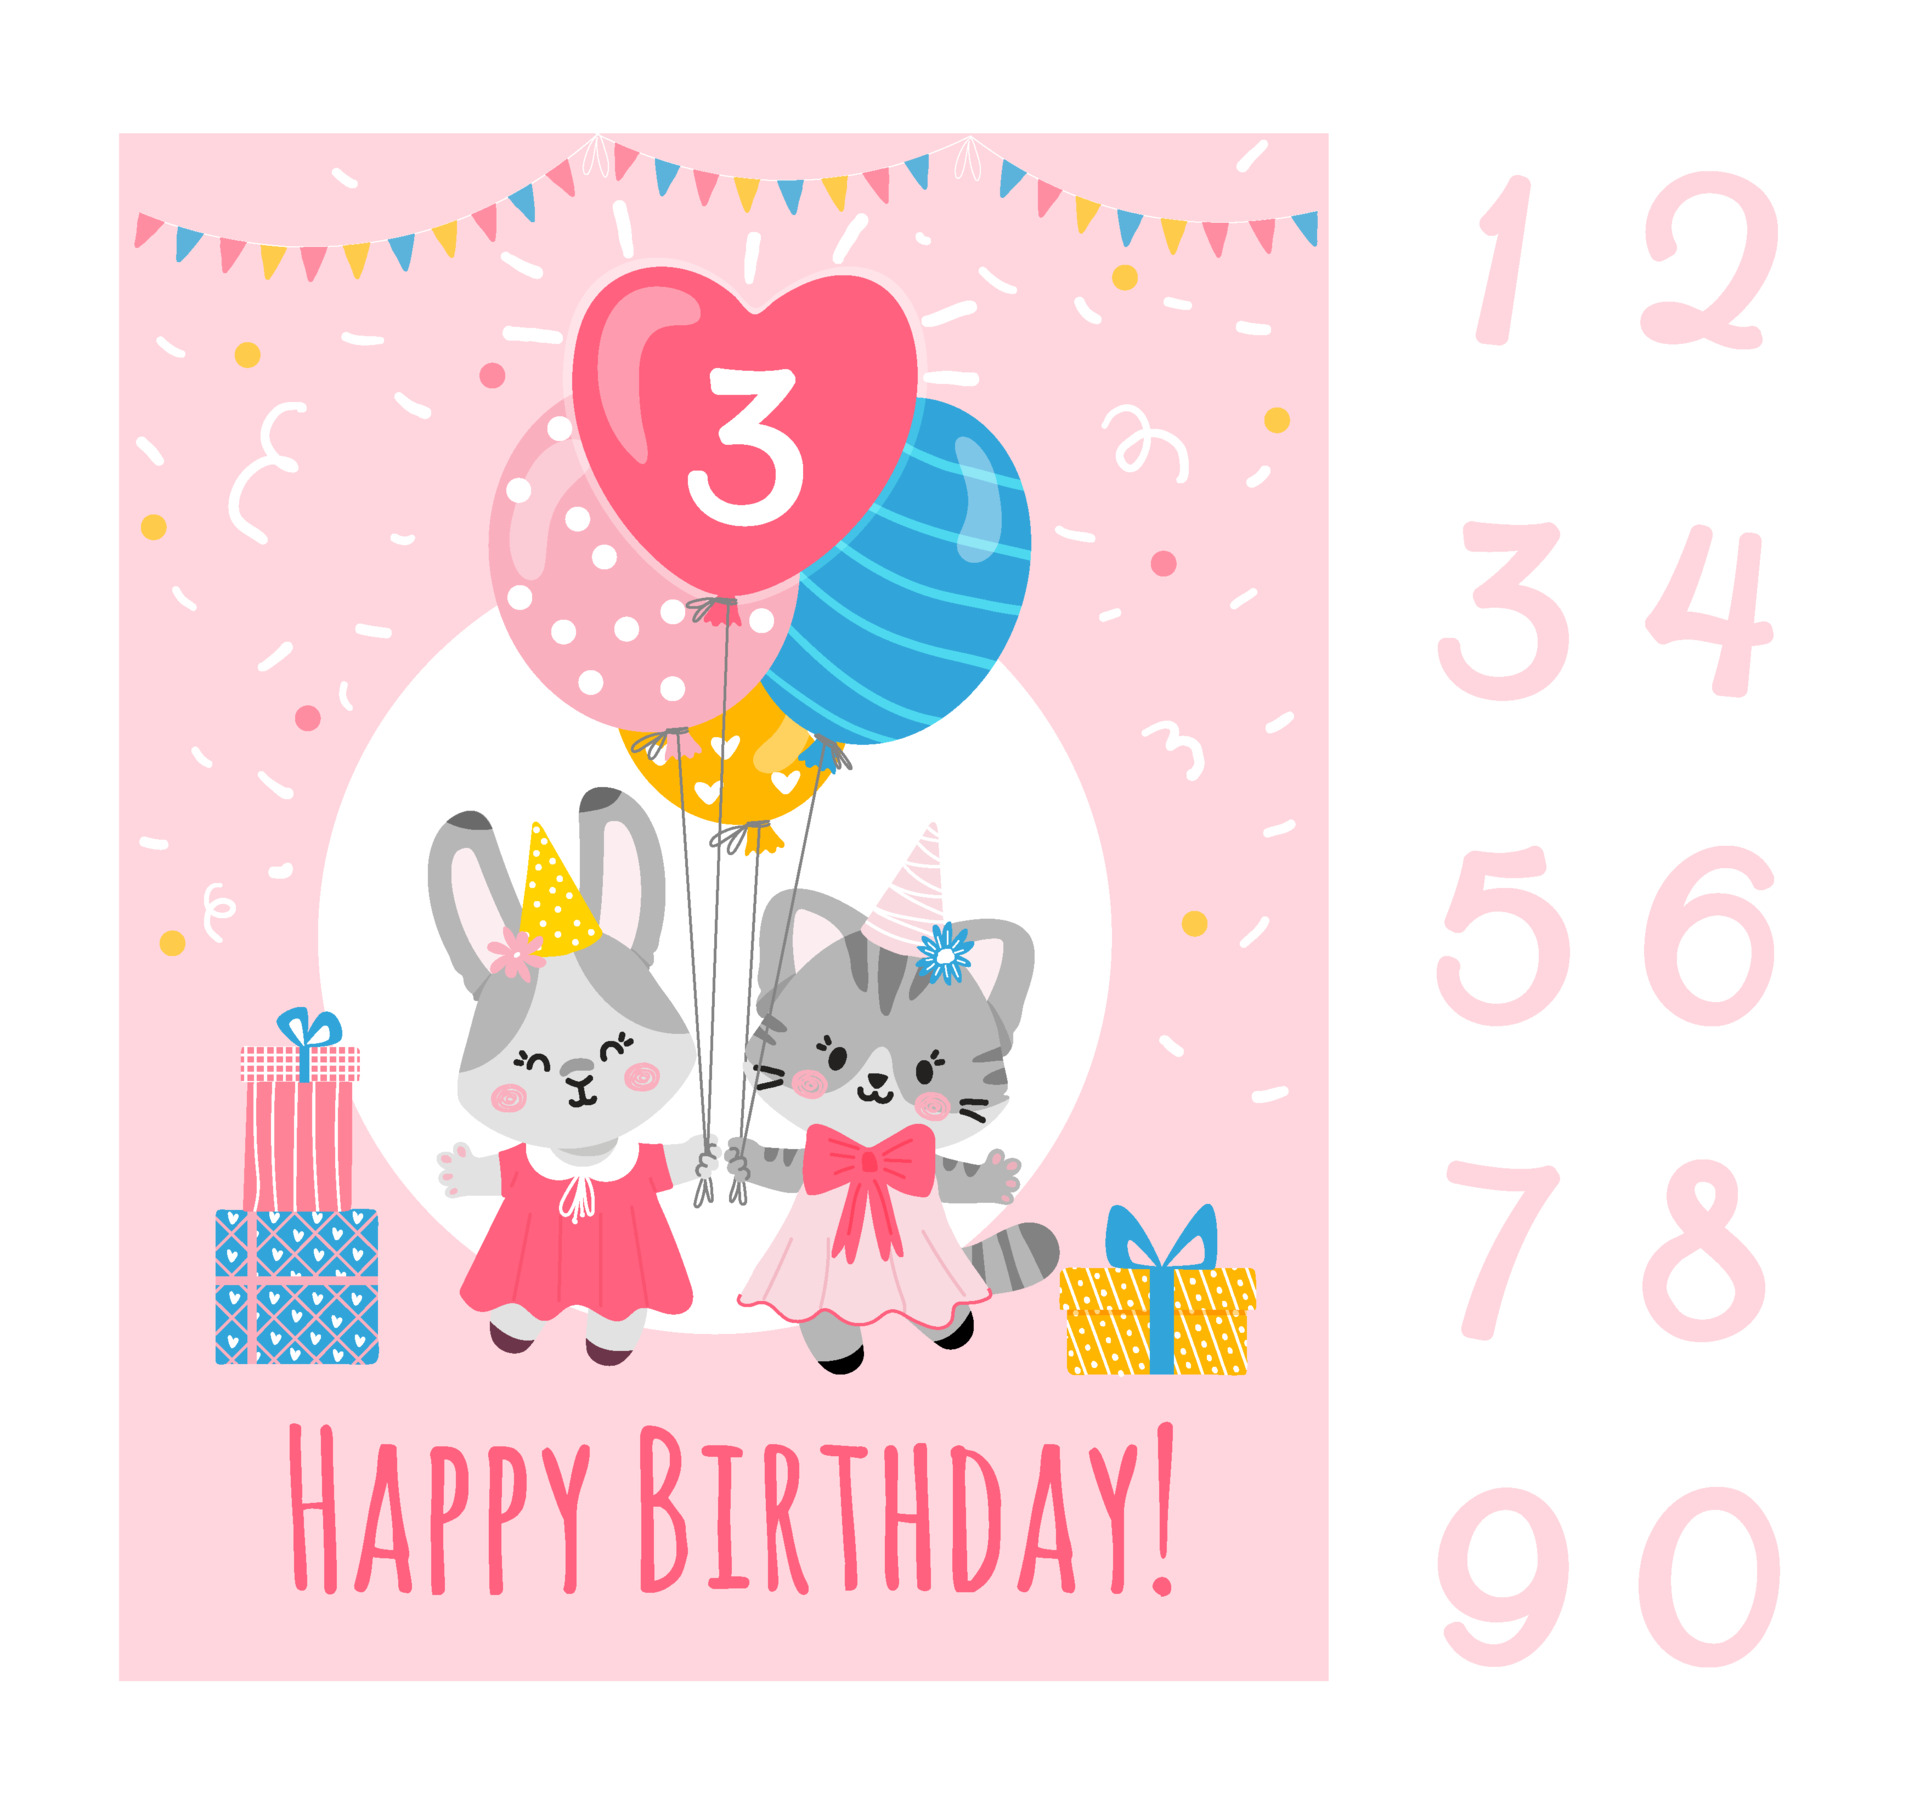 Birthday party card template with numbers,bunny and kitty holding ...